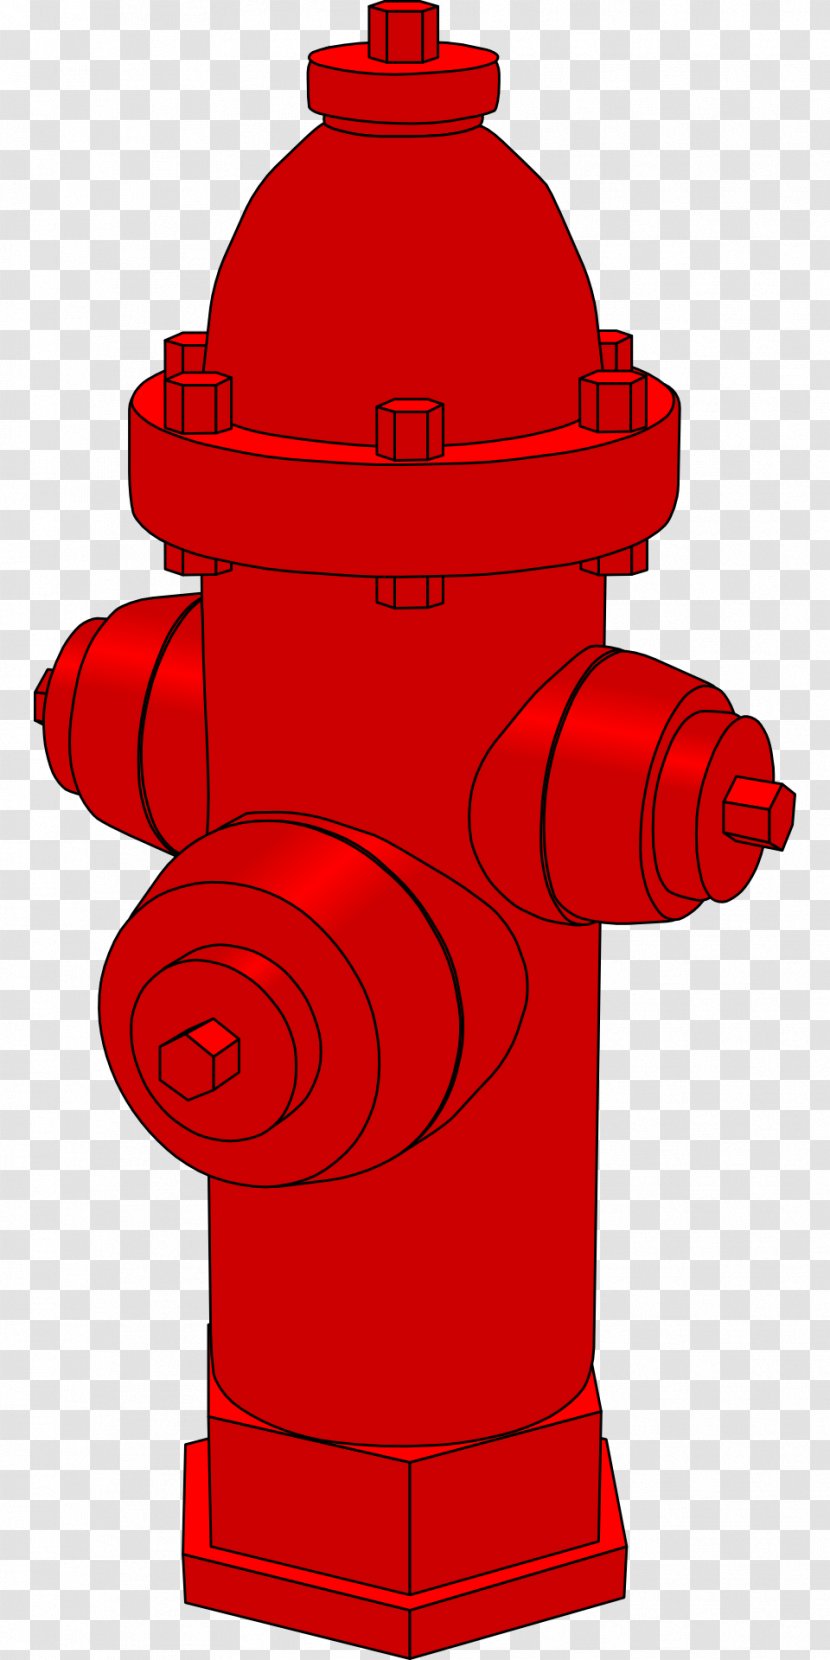 Fire Hydrant Royalty-free Clip Art - Watercolor - Firefighter Transparent PNG